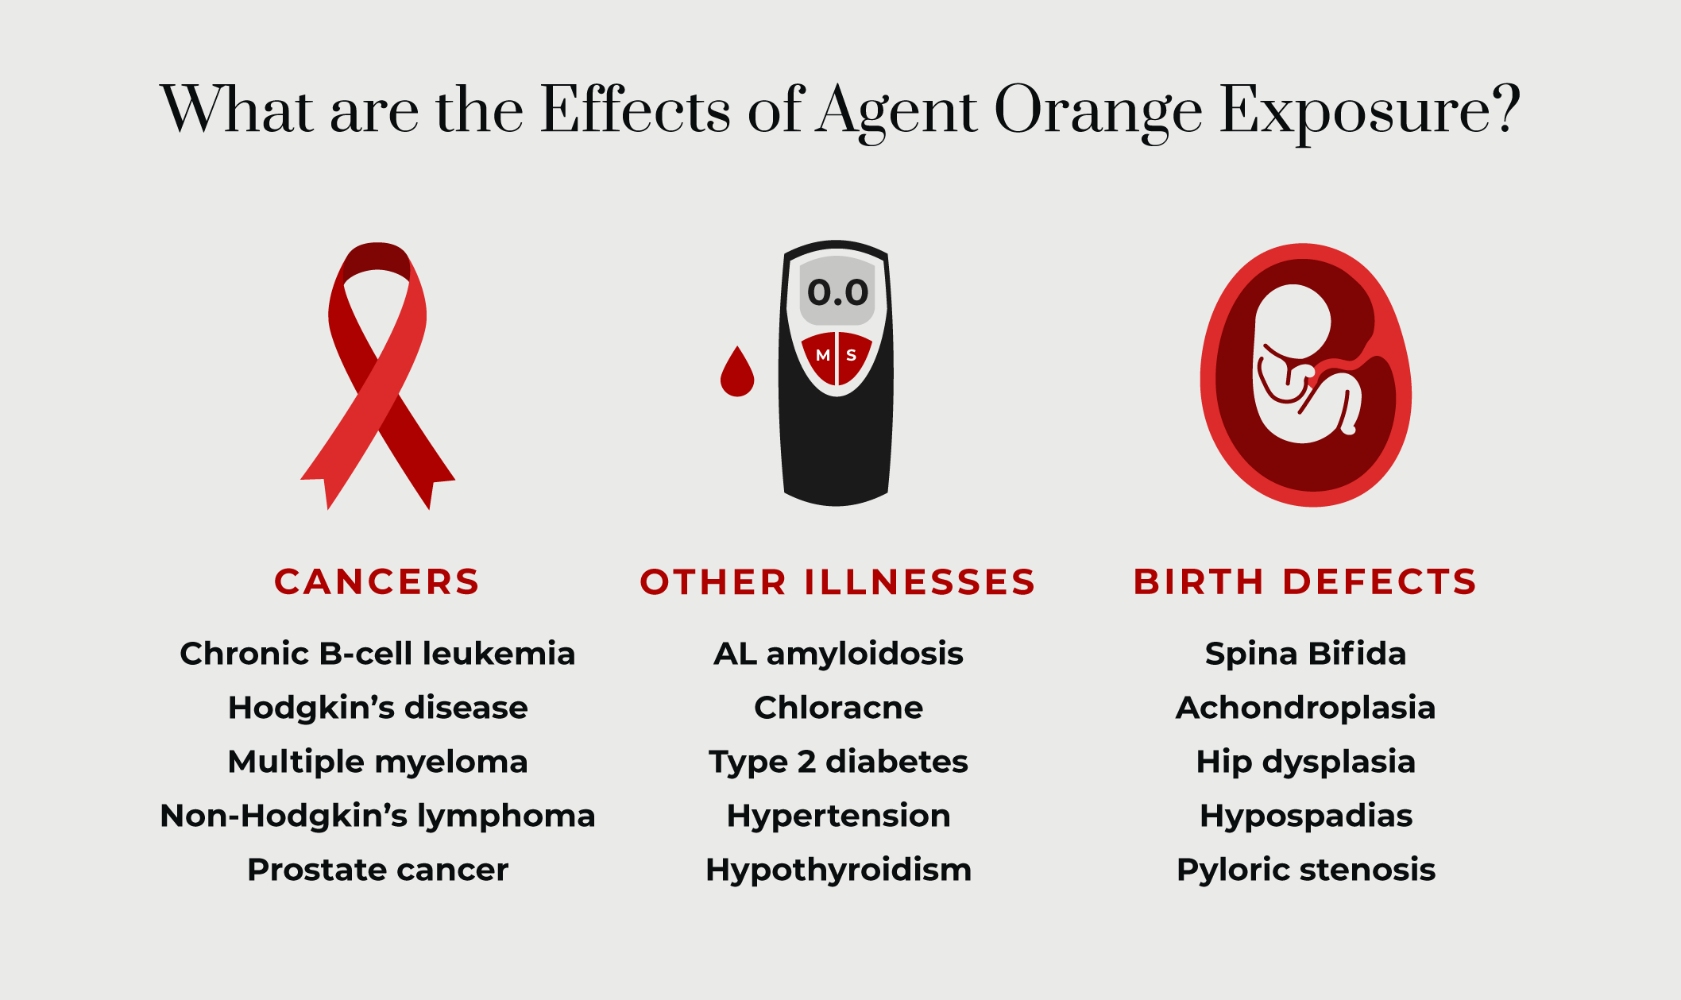 What are the effects of agent orange exposure?